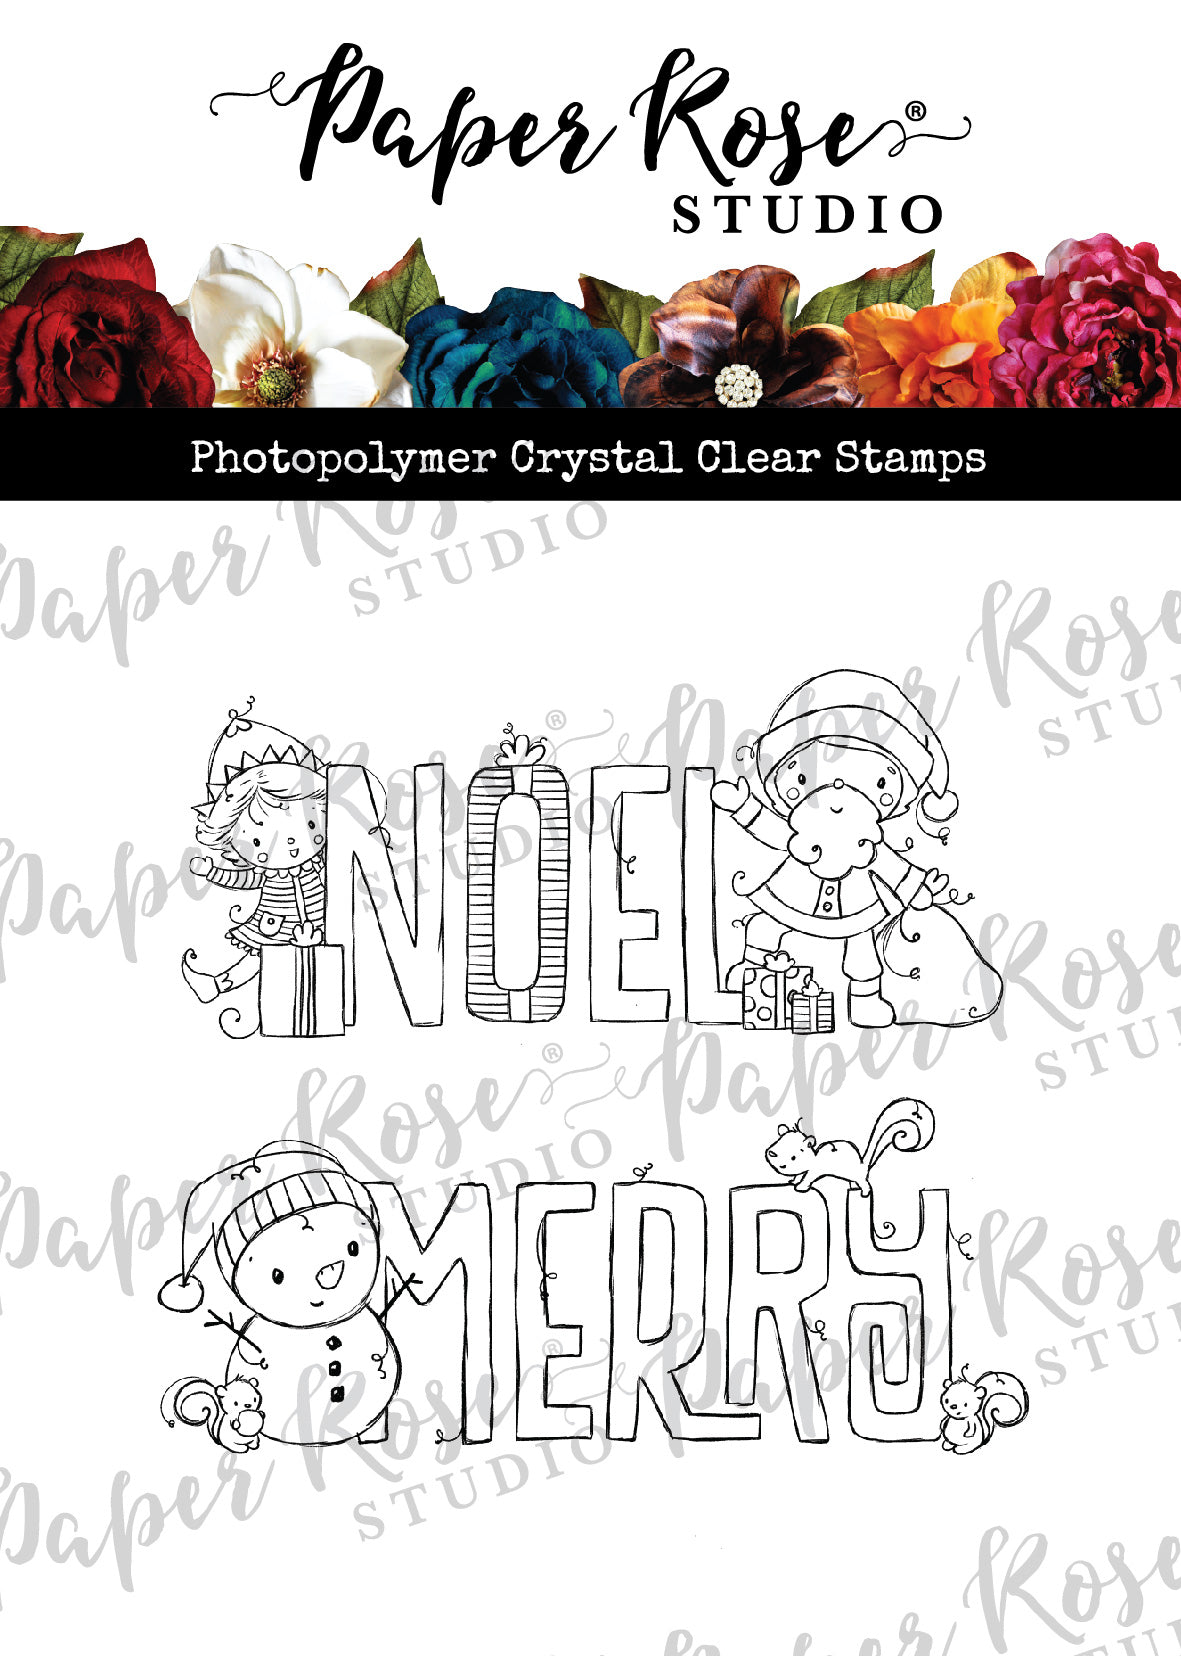 Christmas Merry and Noel Small Word Duo Clear Stamp 31016 - Paper Rose Studio